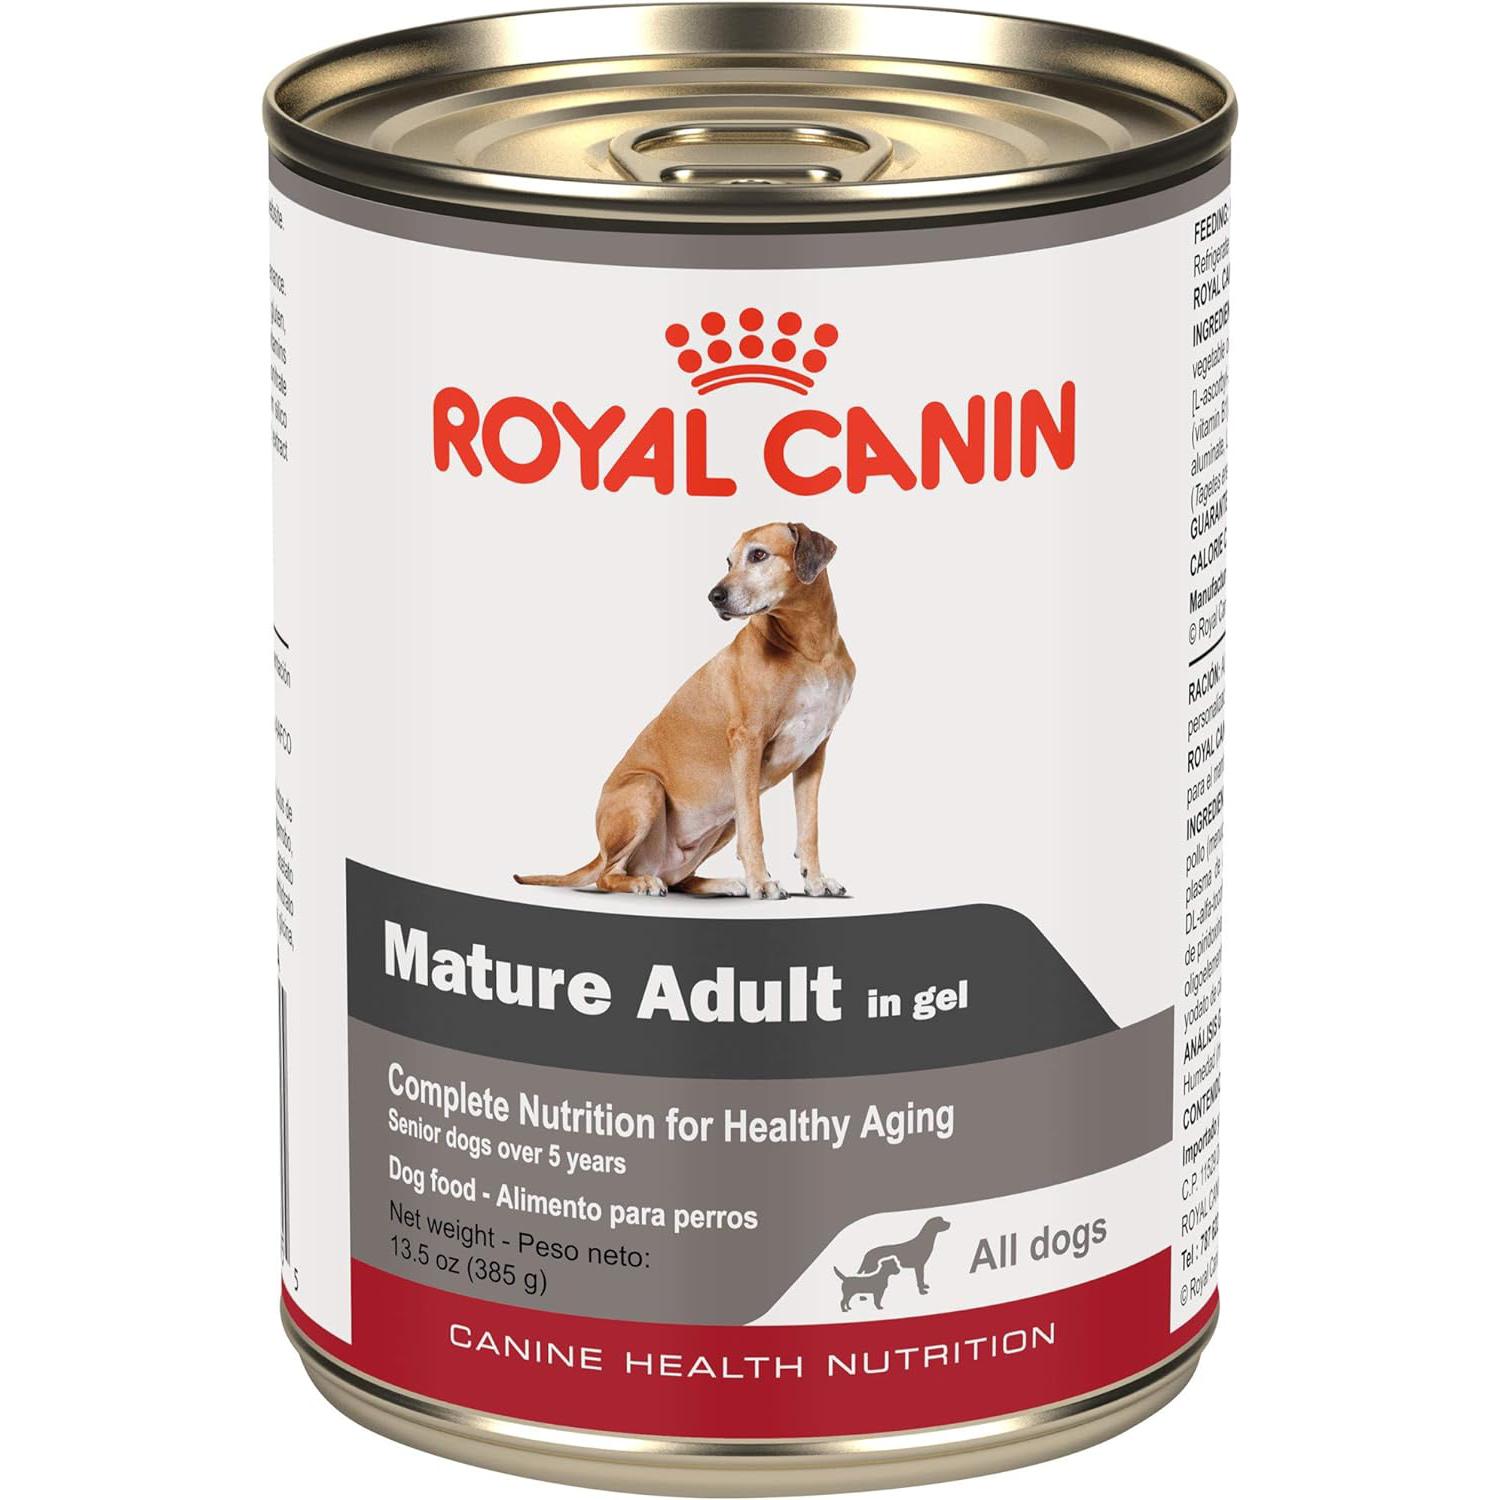 New Project Royal Canin Canine Health Nutrition Mature Adult In Gel Canned Dog Food 